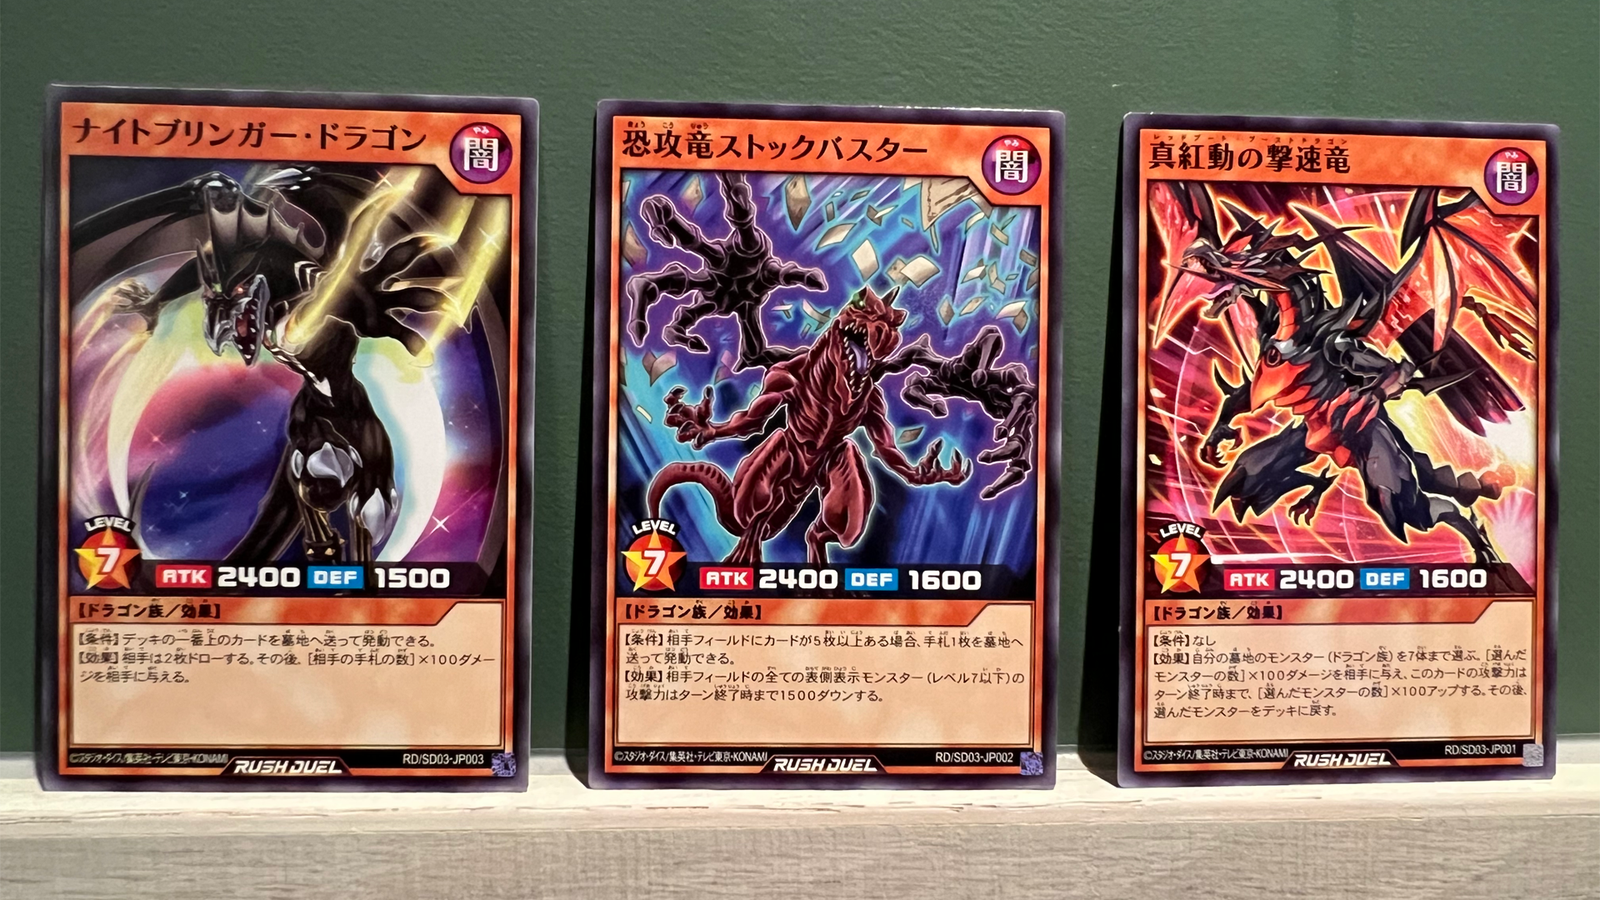 YuGiOh News on X: ❰2-𝗣𝗹𝗮𝘆𝗲𝗿 𝗦𝘁𝗮𝗿𝘁𝗲𝗿 𝗦𝗲𝘁❱ Who